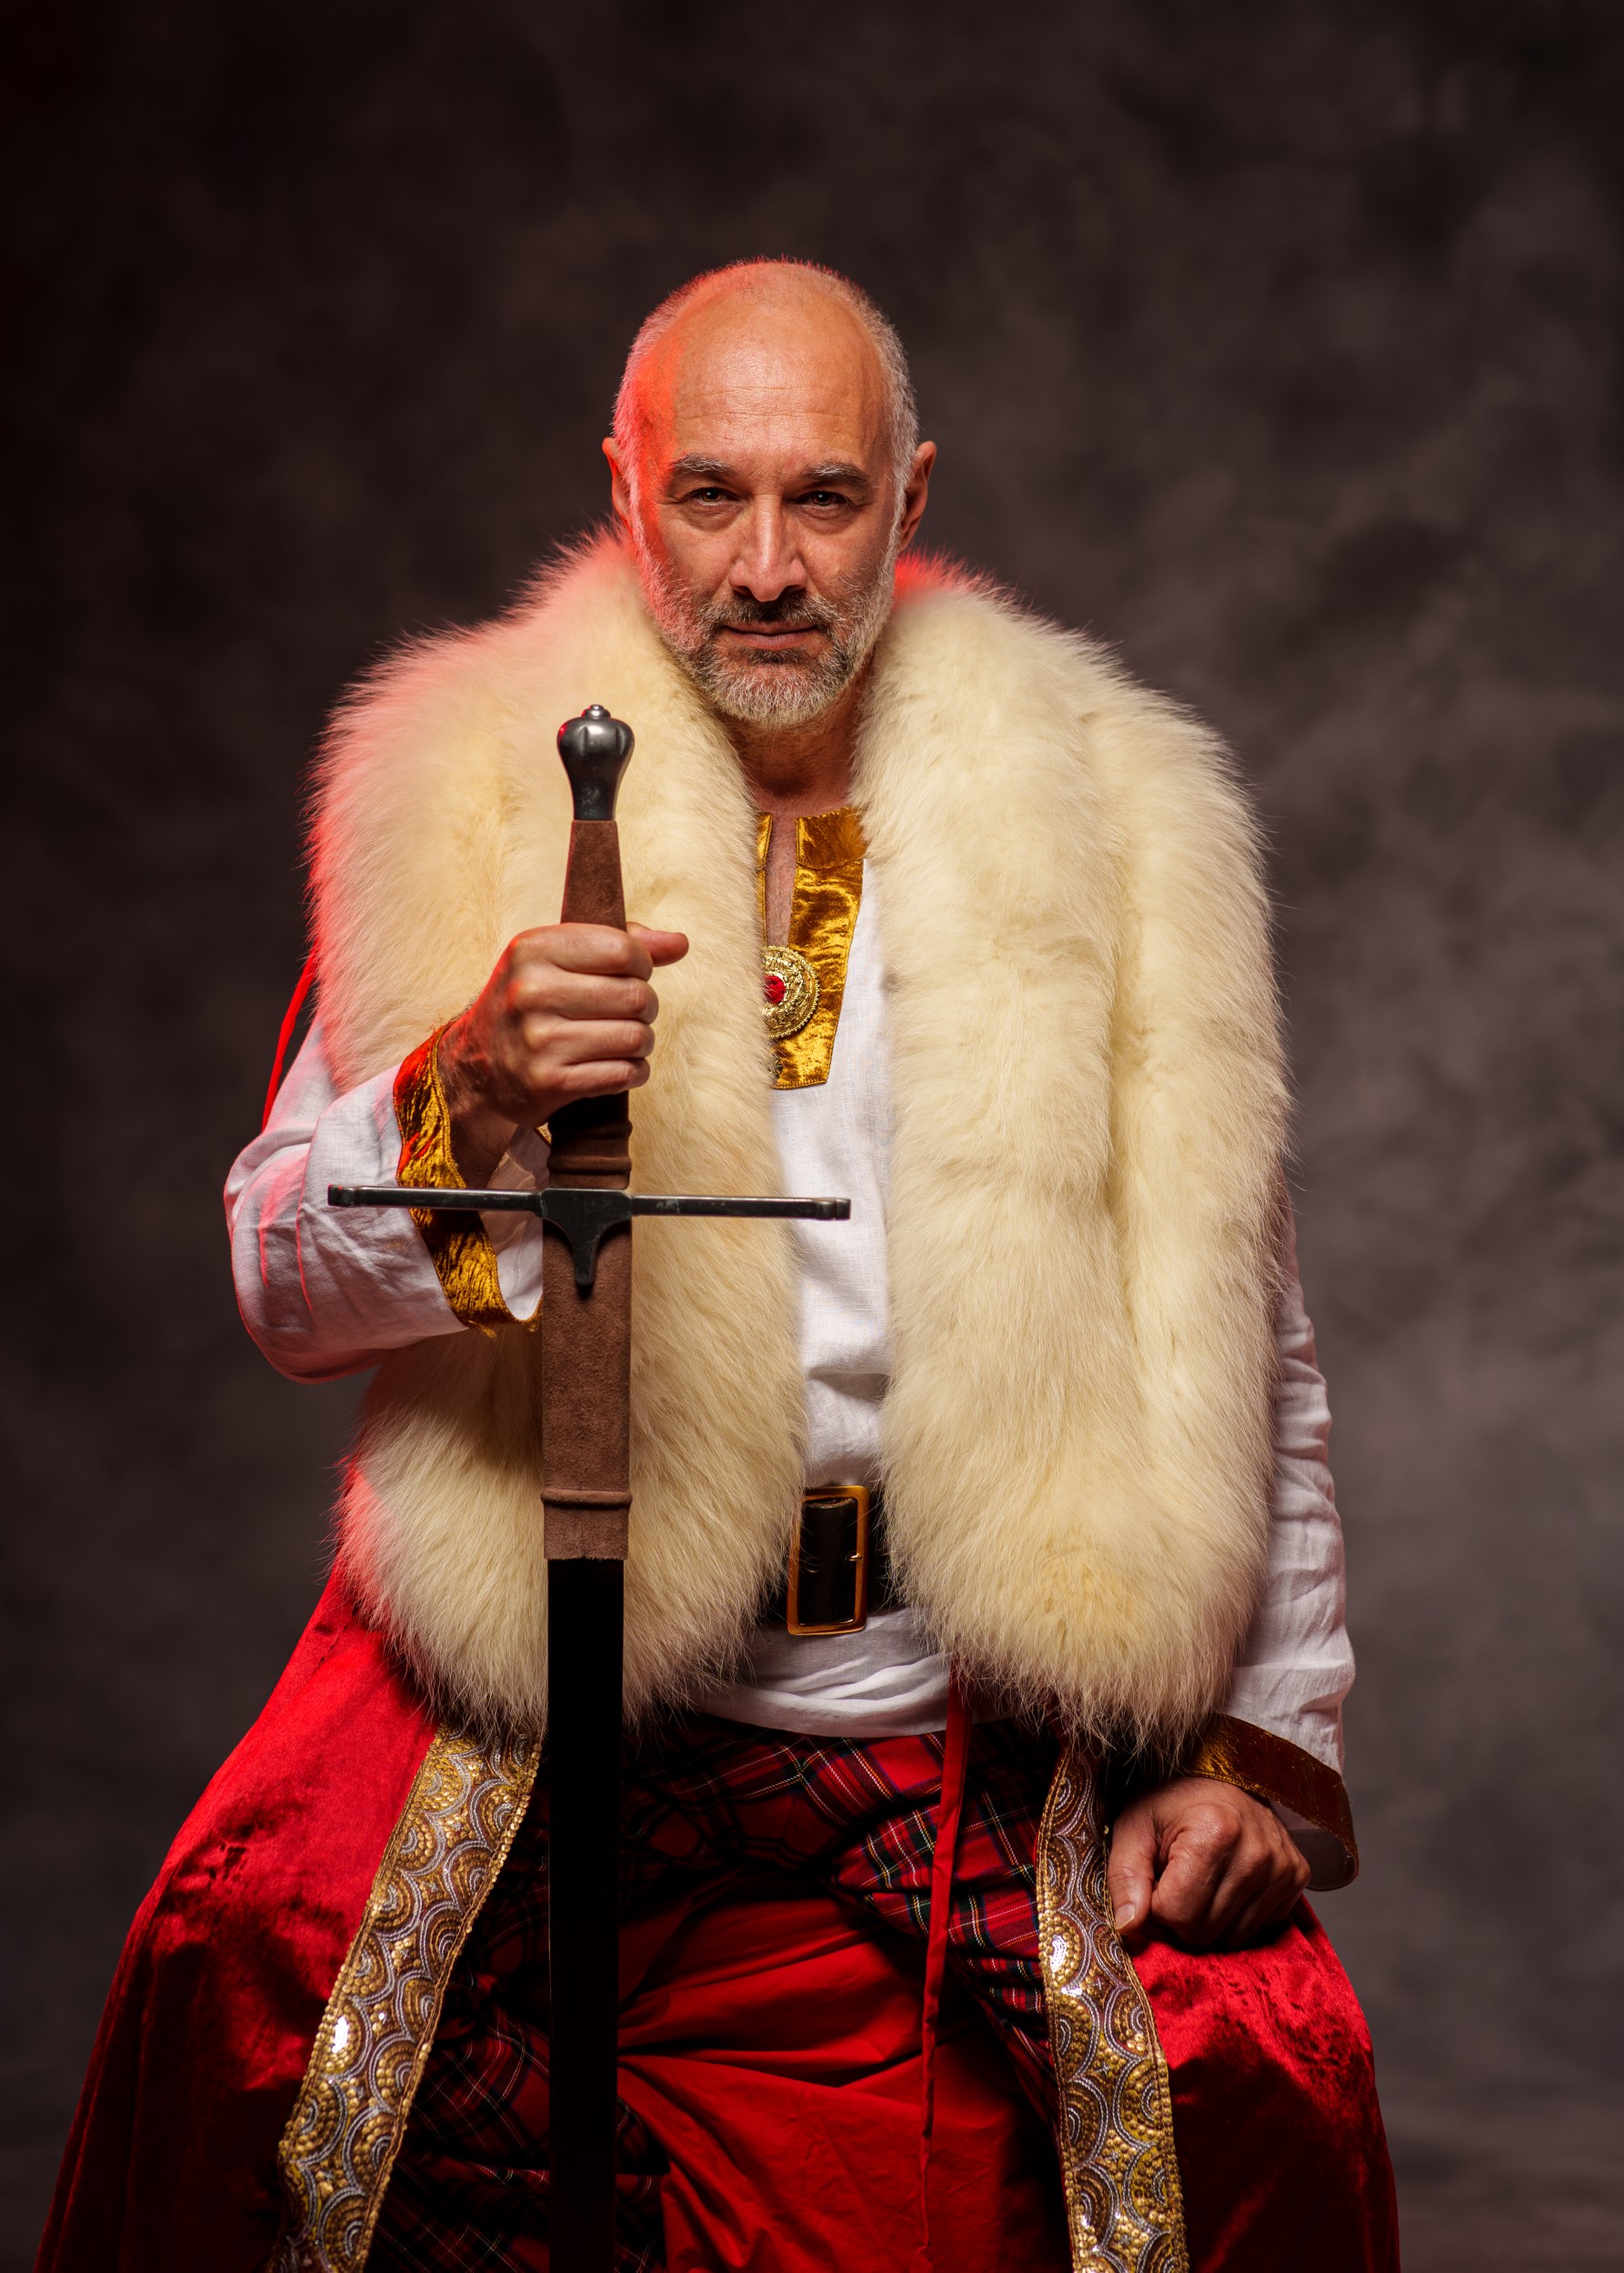 Regal man holding sword wearing red robes with gold and fur trim